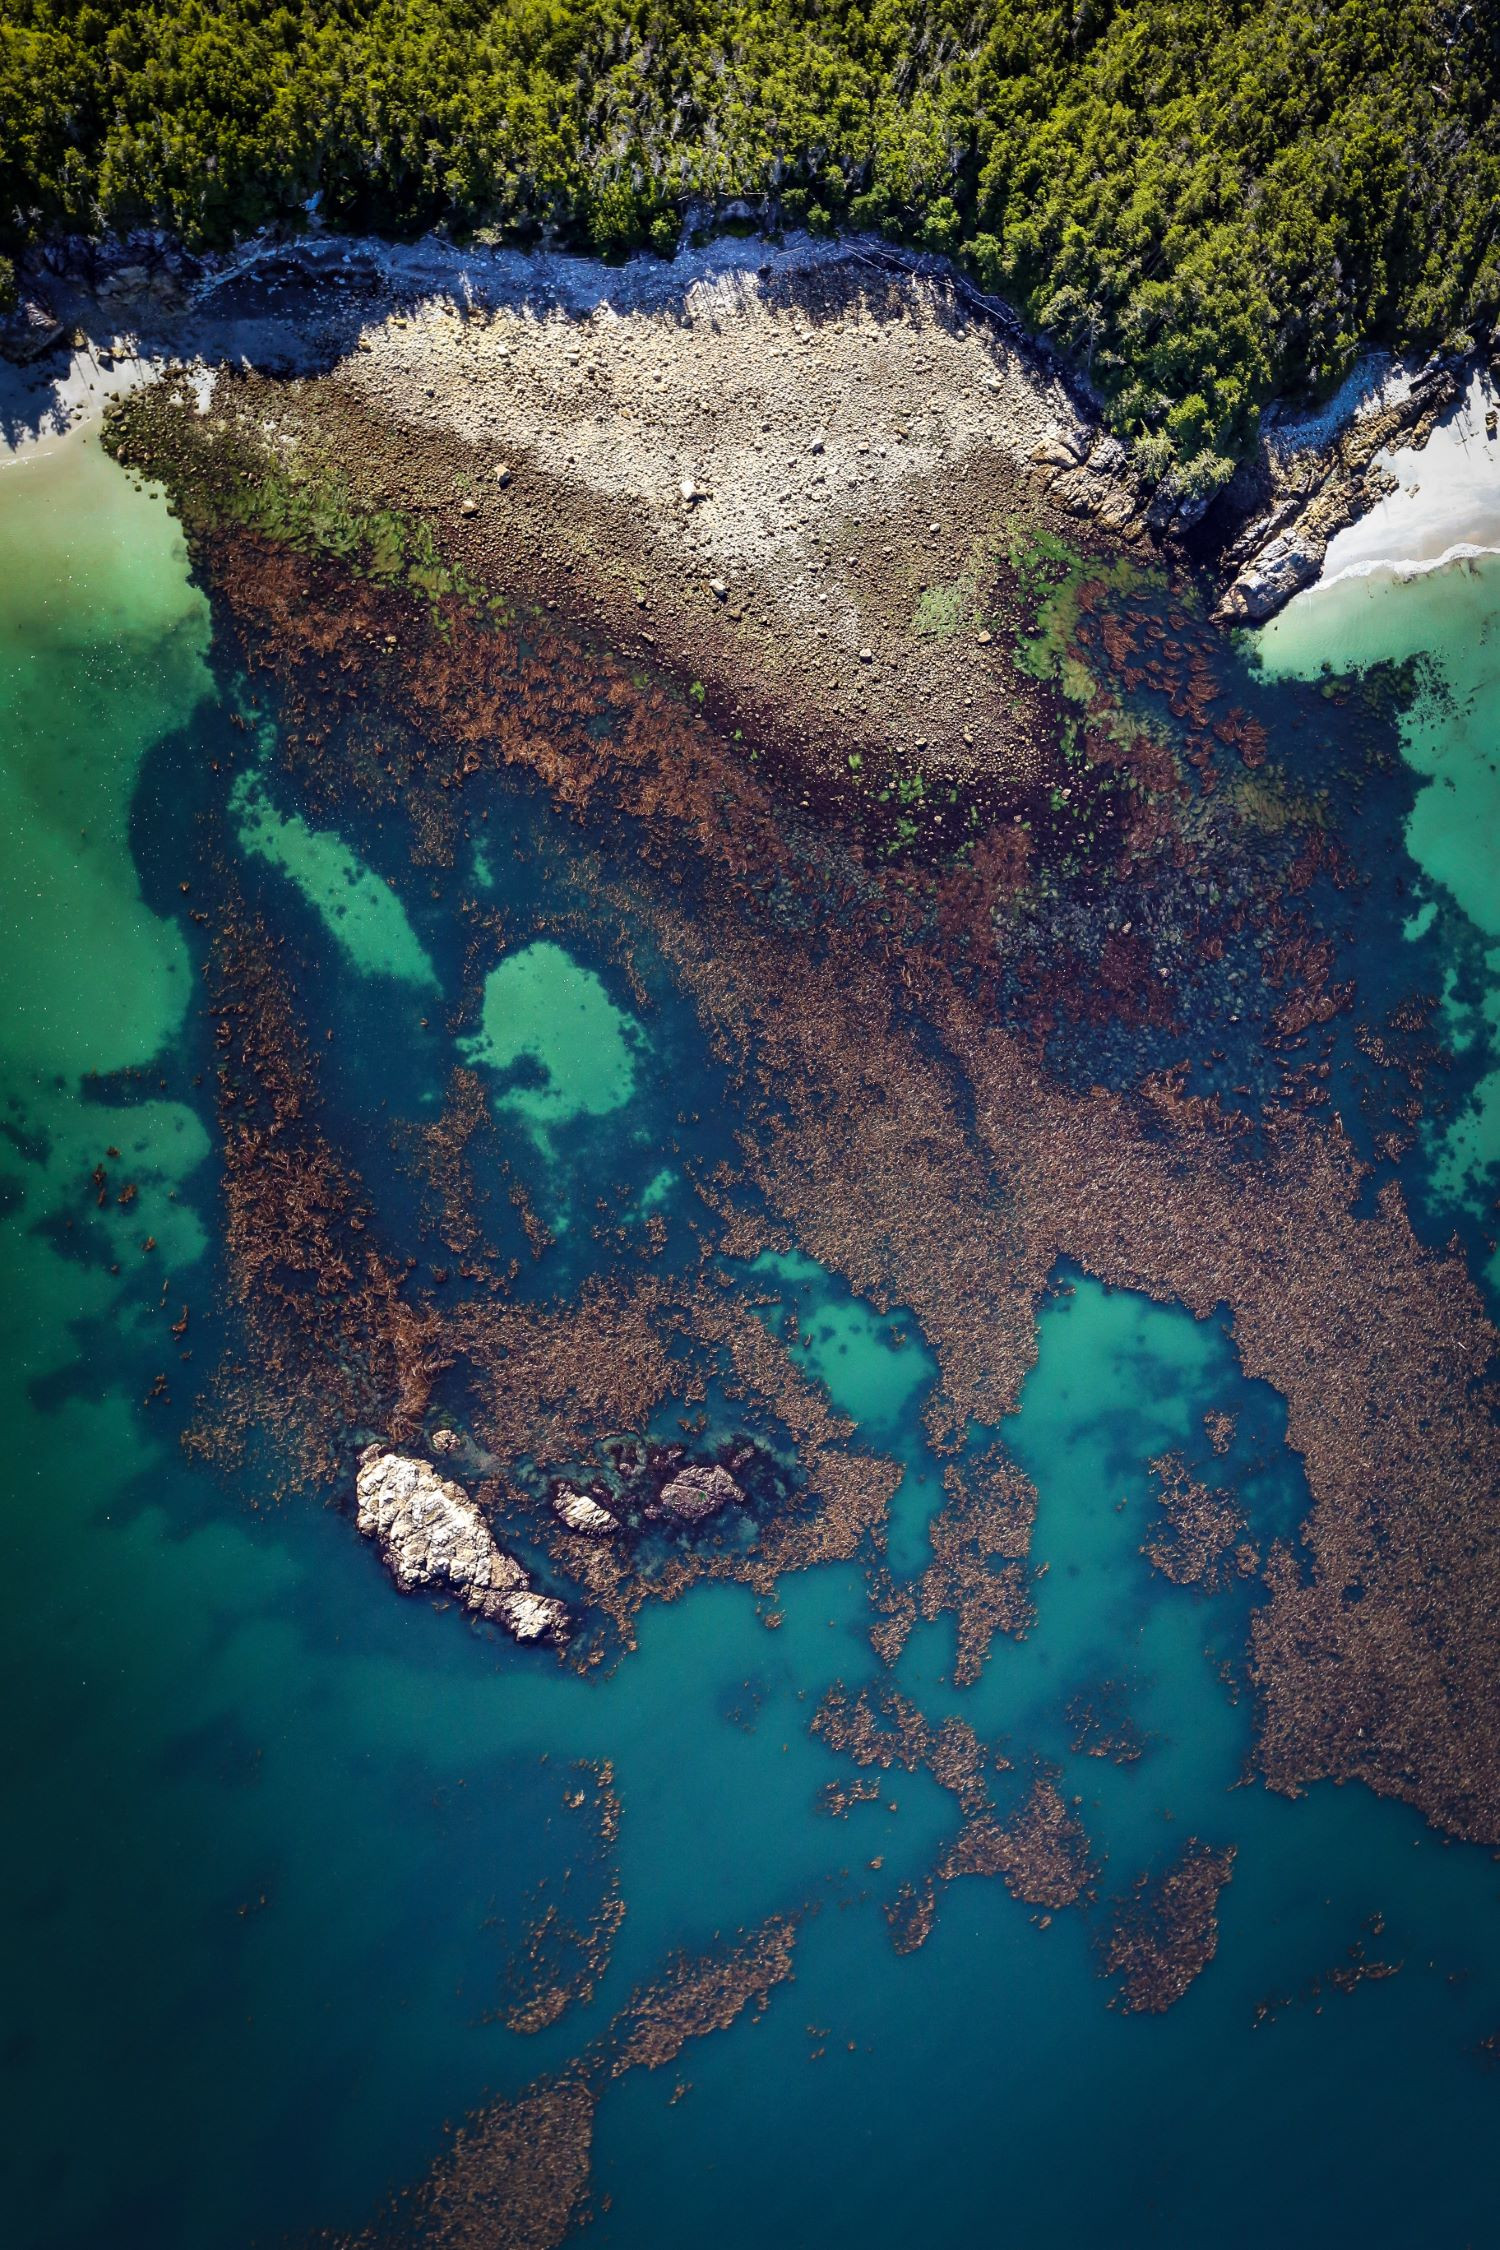 Kelp bed from above